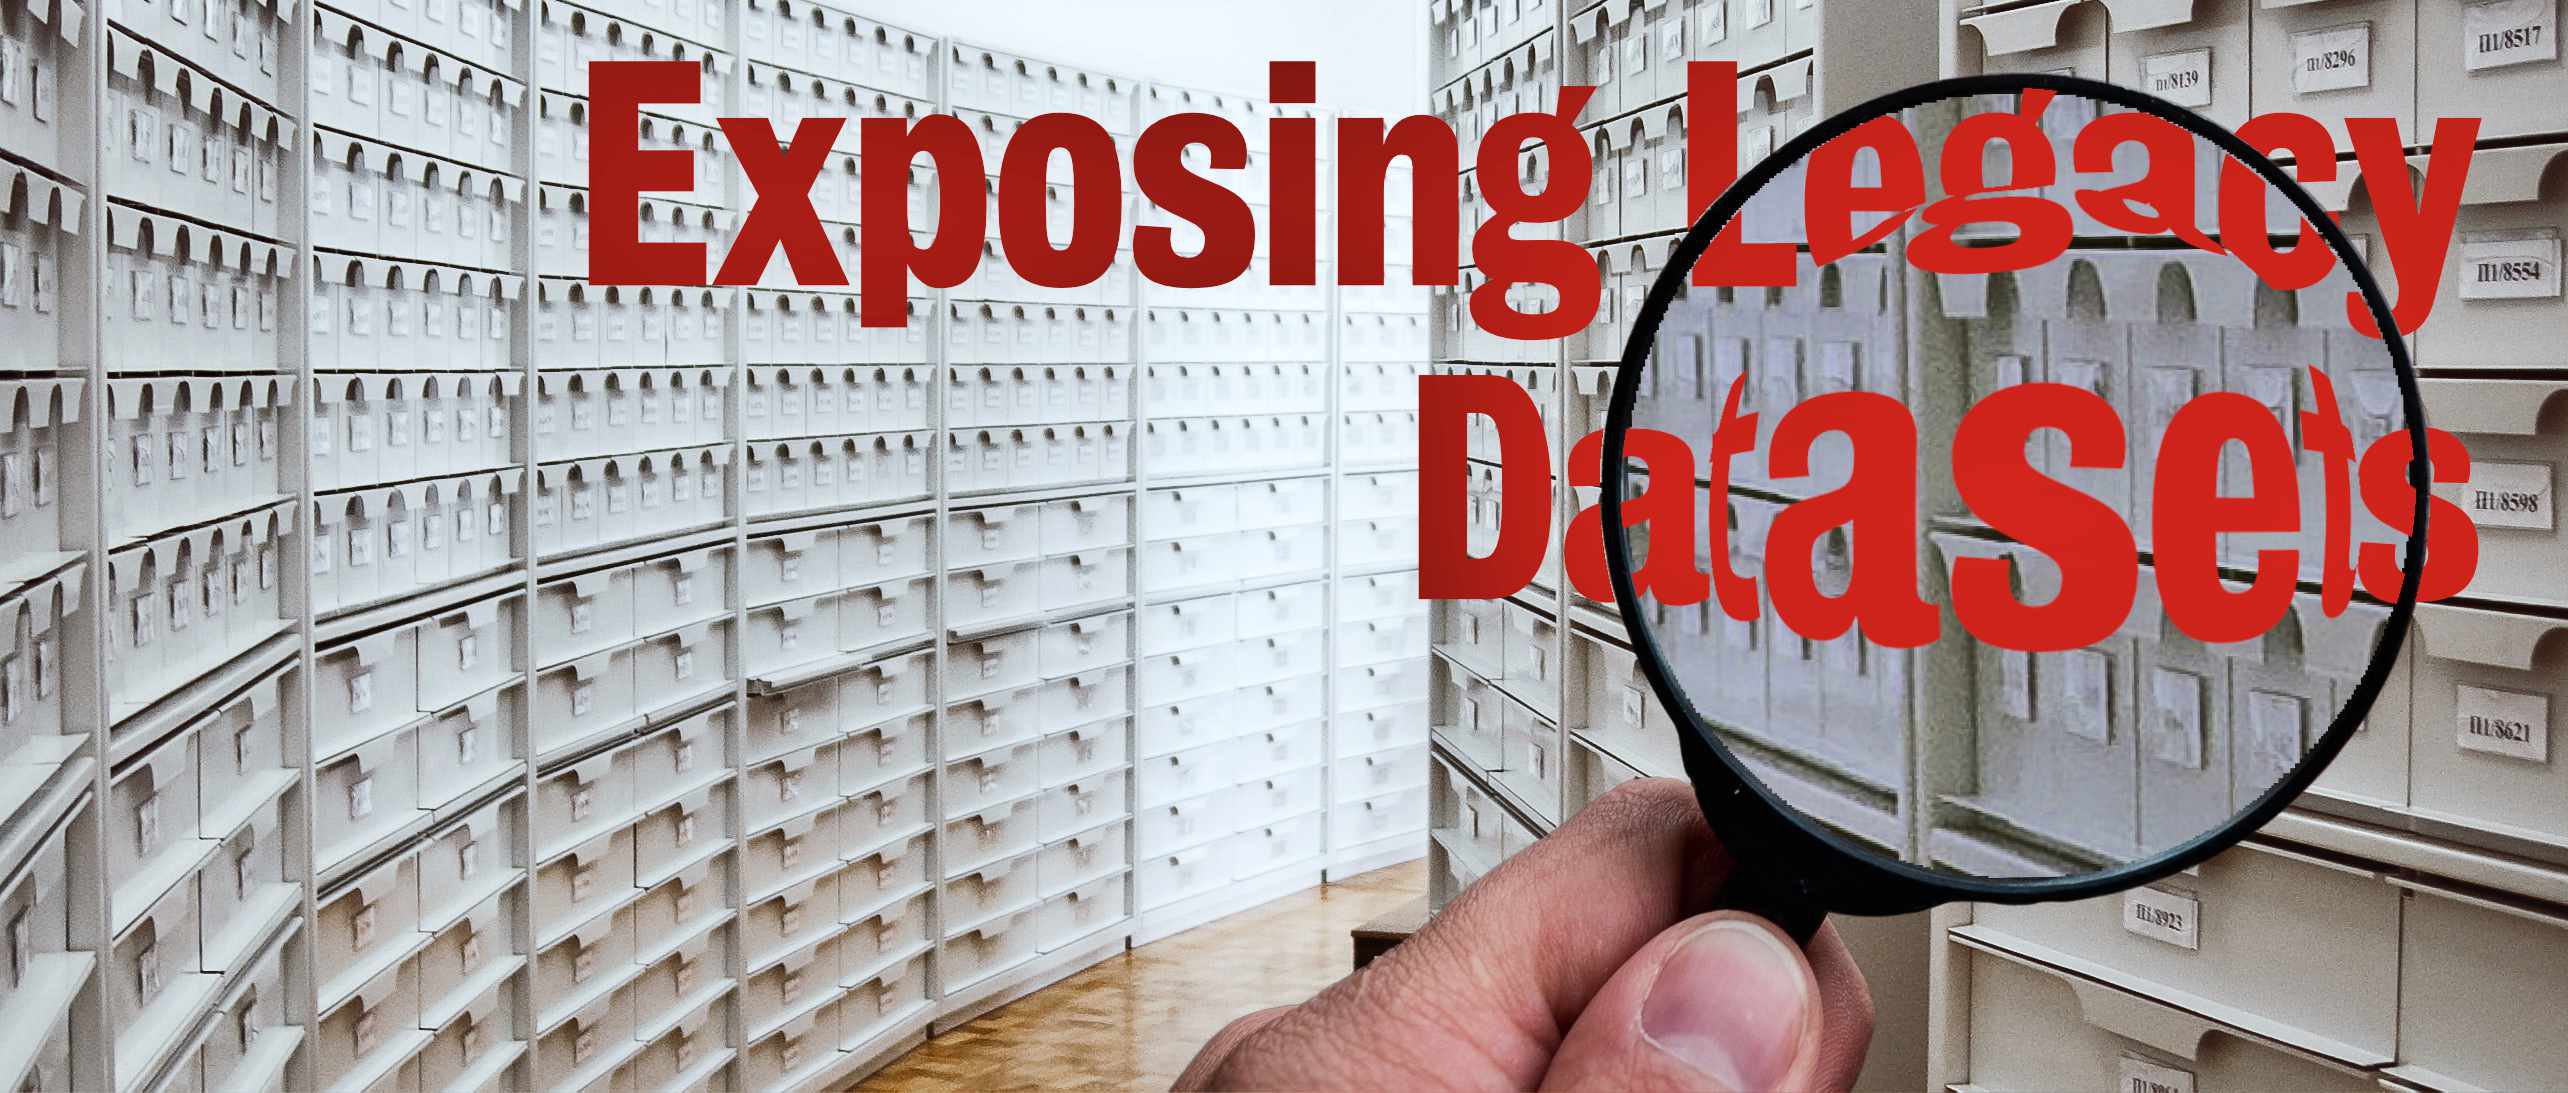 A hand holding a magnifying glass over the red letters shows as 'Exposing Legacy Datasets', over a background of numerous white drawers